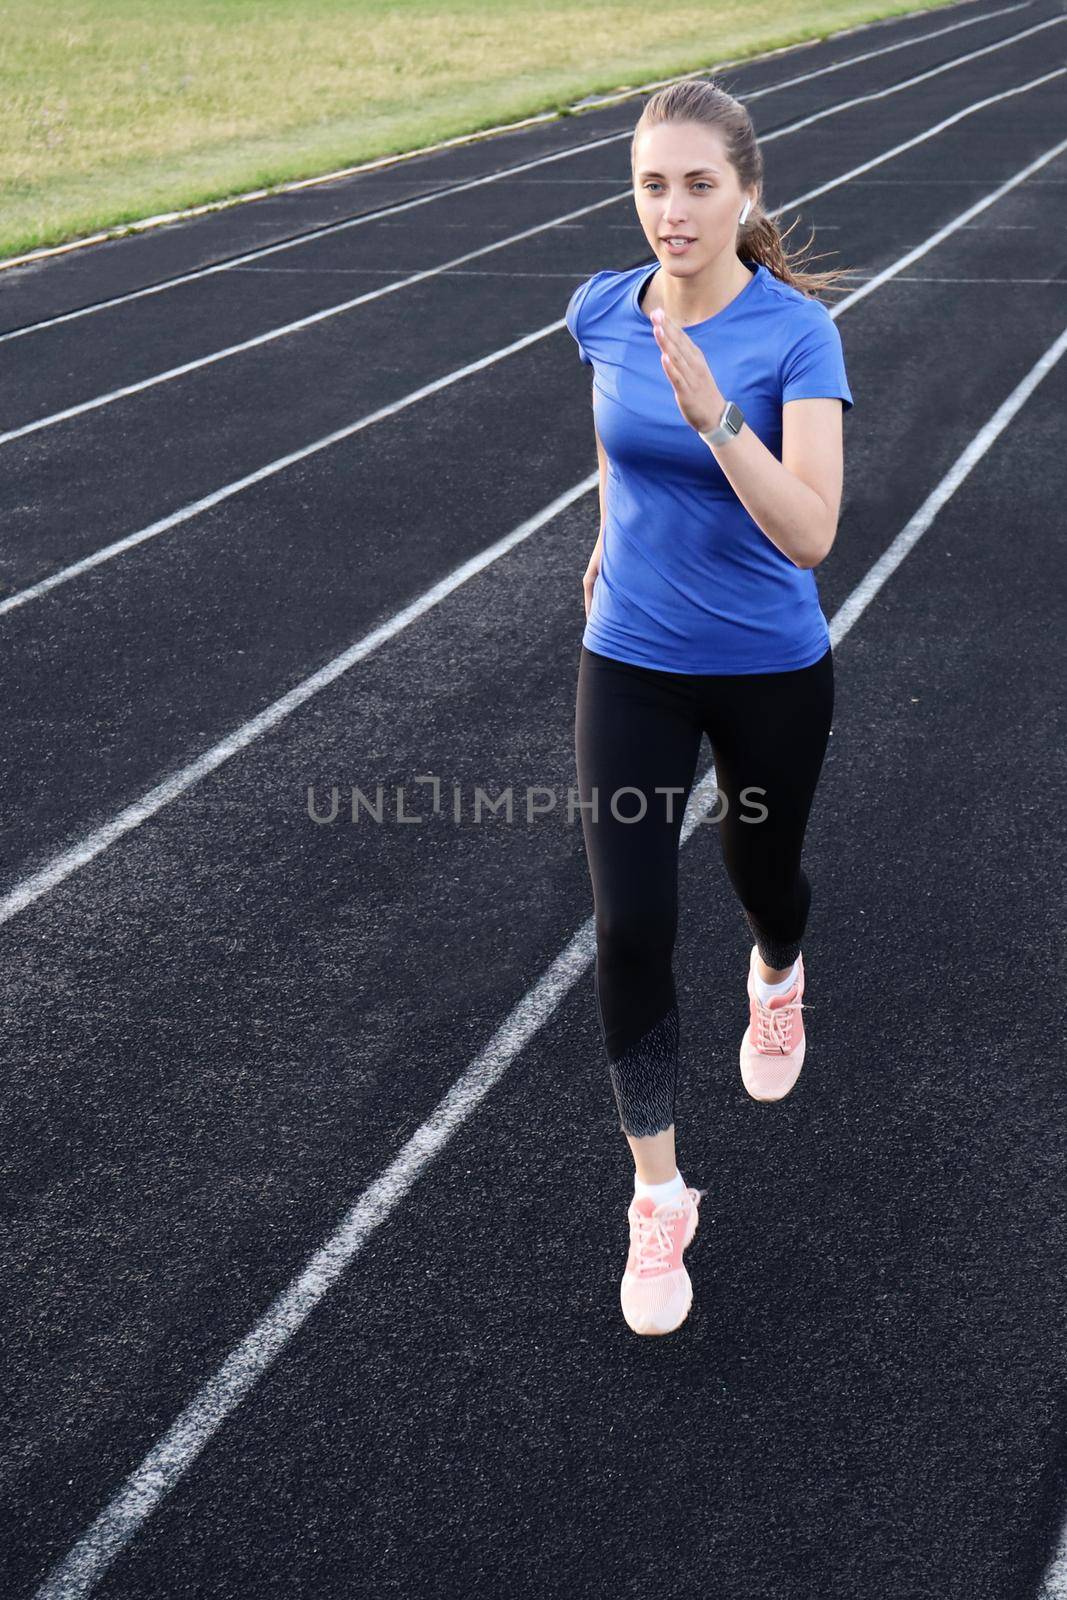 Runner athlete running on athletic track training her cardio in stadium. Jogging at fast pace for competition by tsyhun